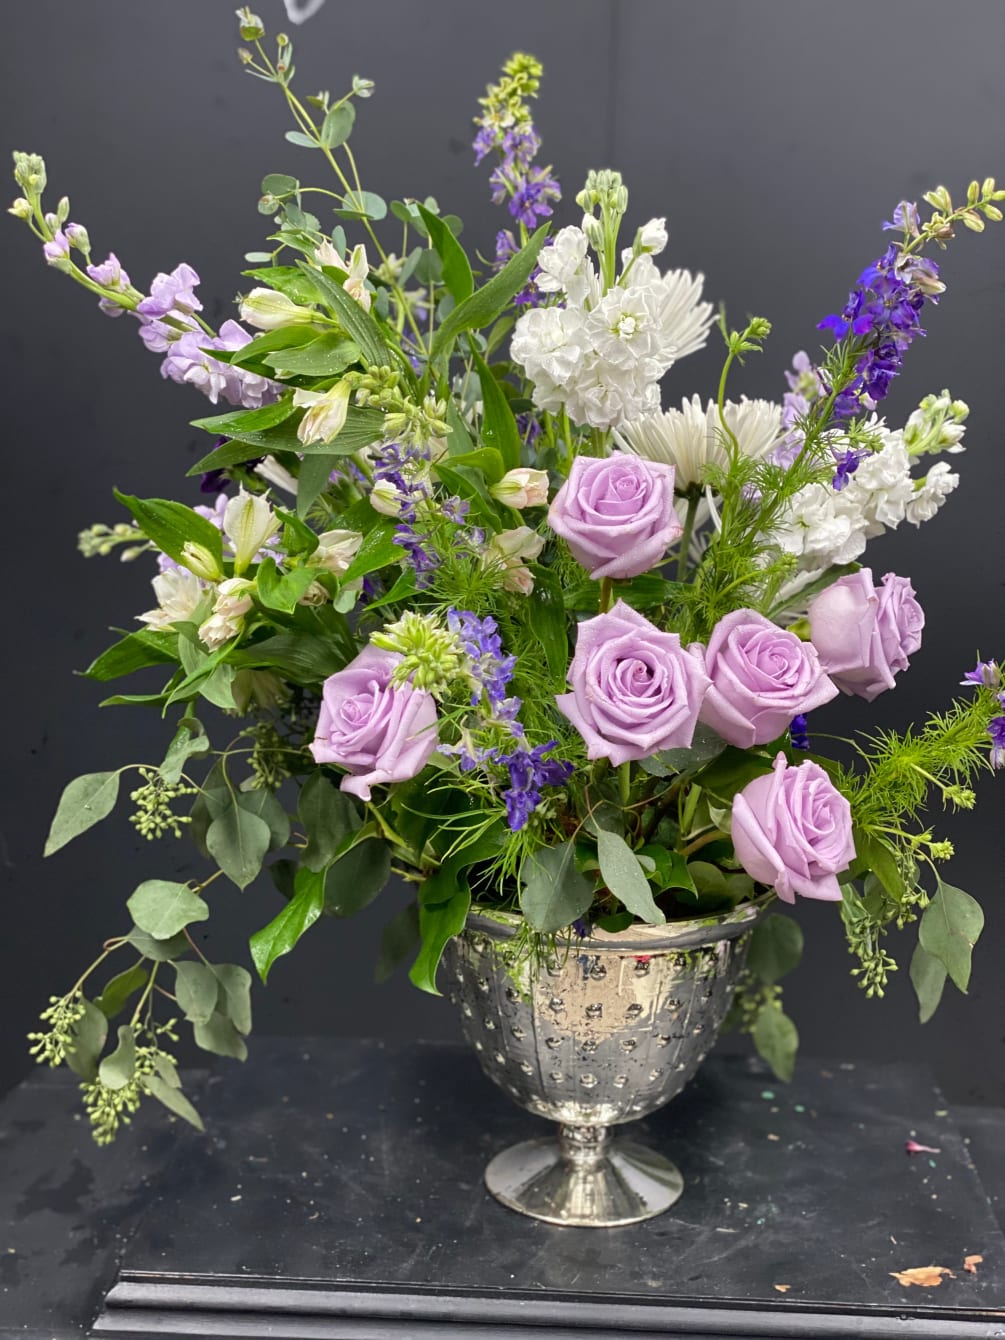 This beautiful arrangement is made in a mercury glass vase and contains